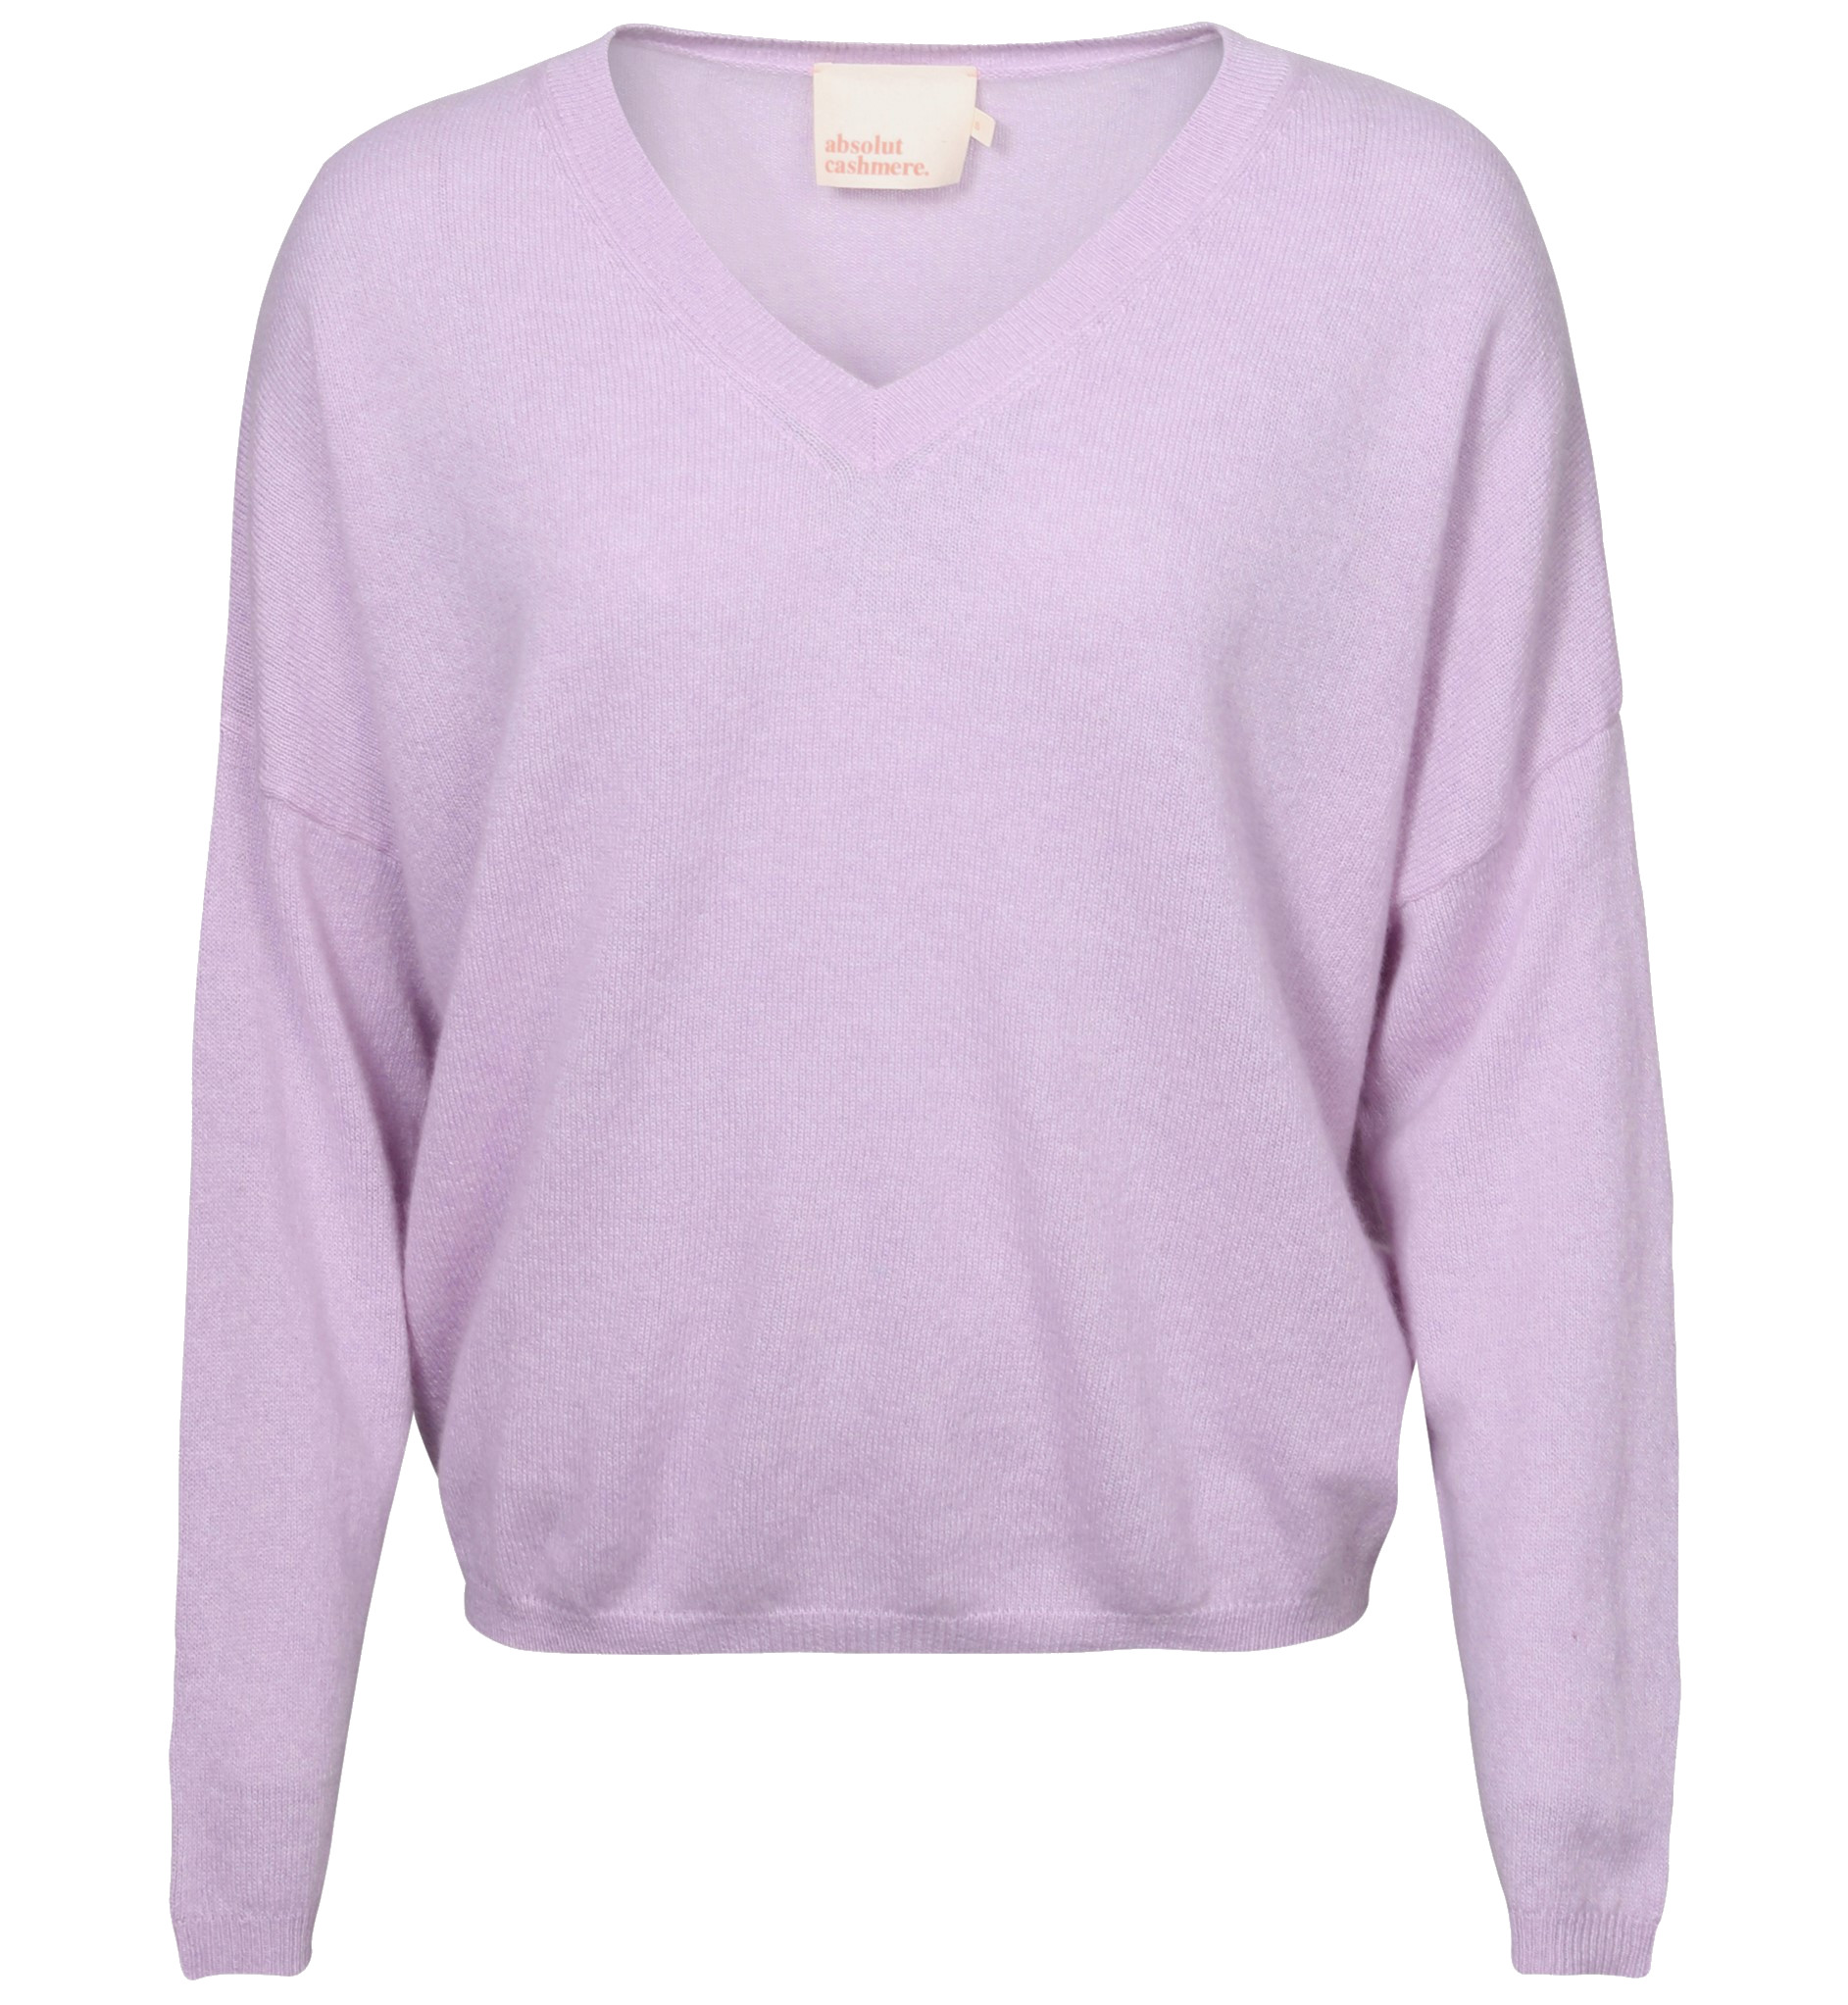 ABSOLUT CASHMERE V-Neck Sweater Alicia in Light Lilac